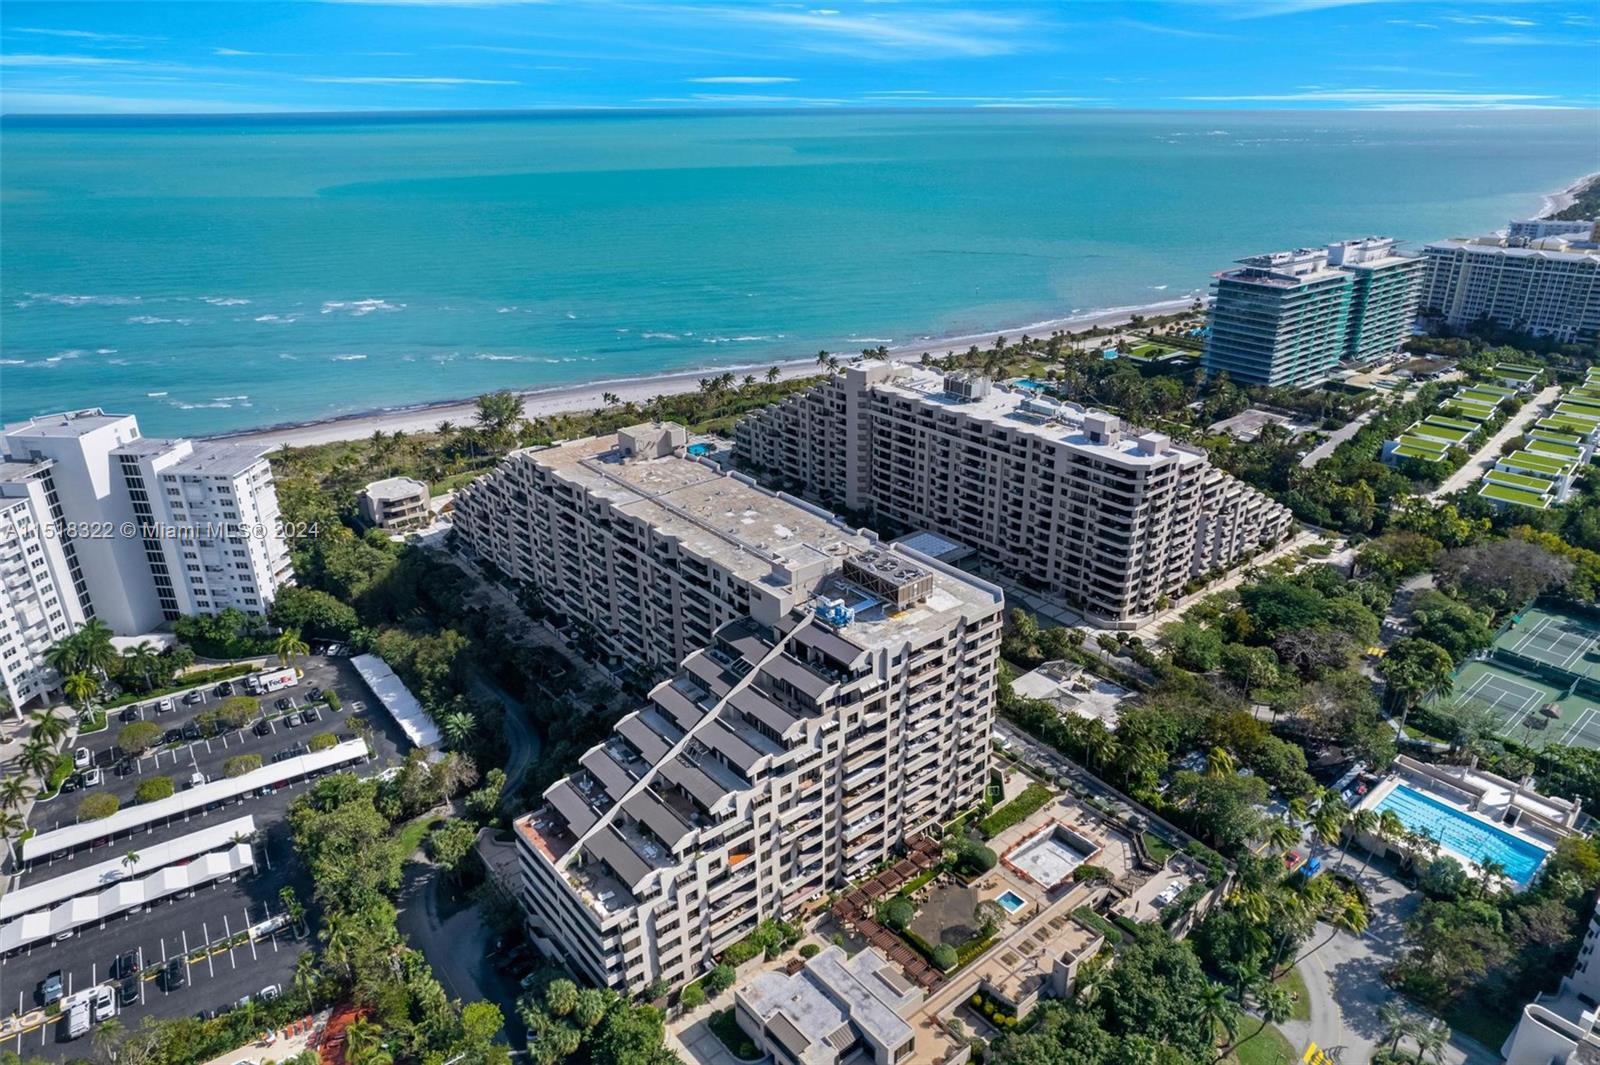 Large 2/2 condo located on Key Biscayne. The community is secured and gated, and residents have acce